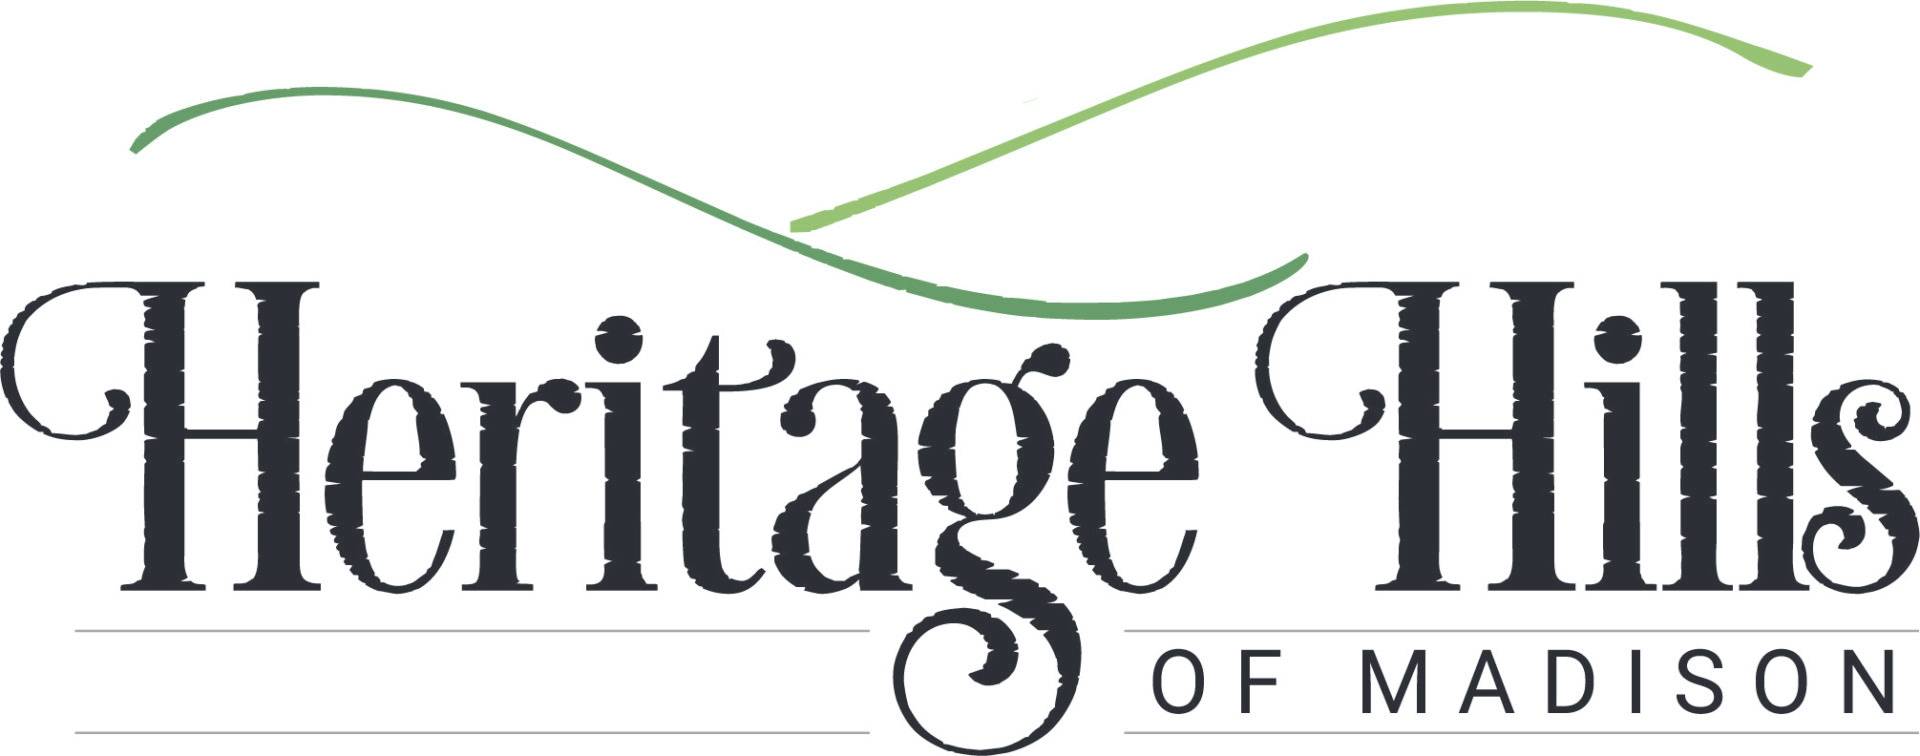 A logo of the heritage club of chicago